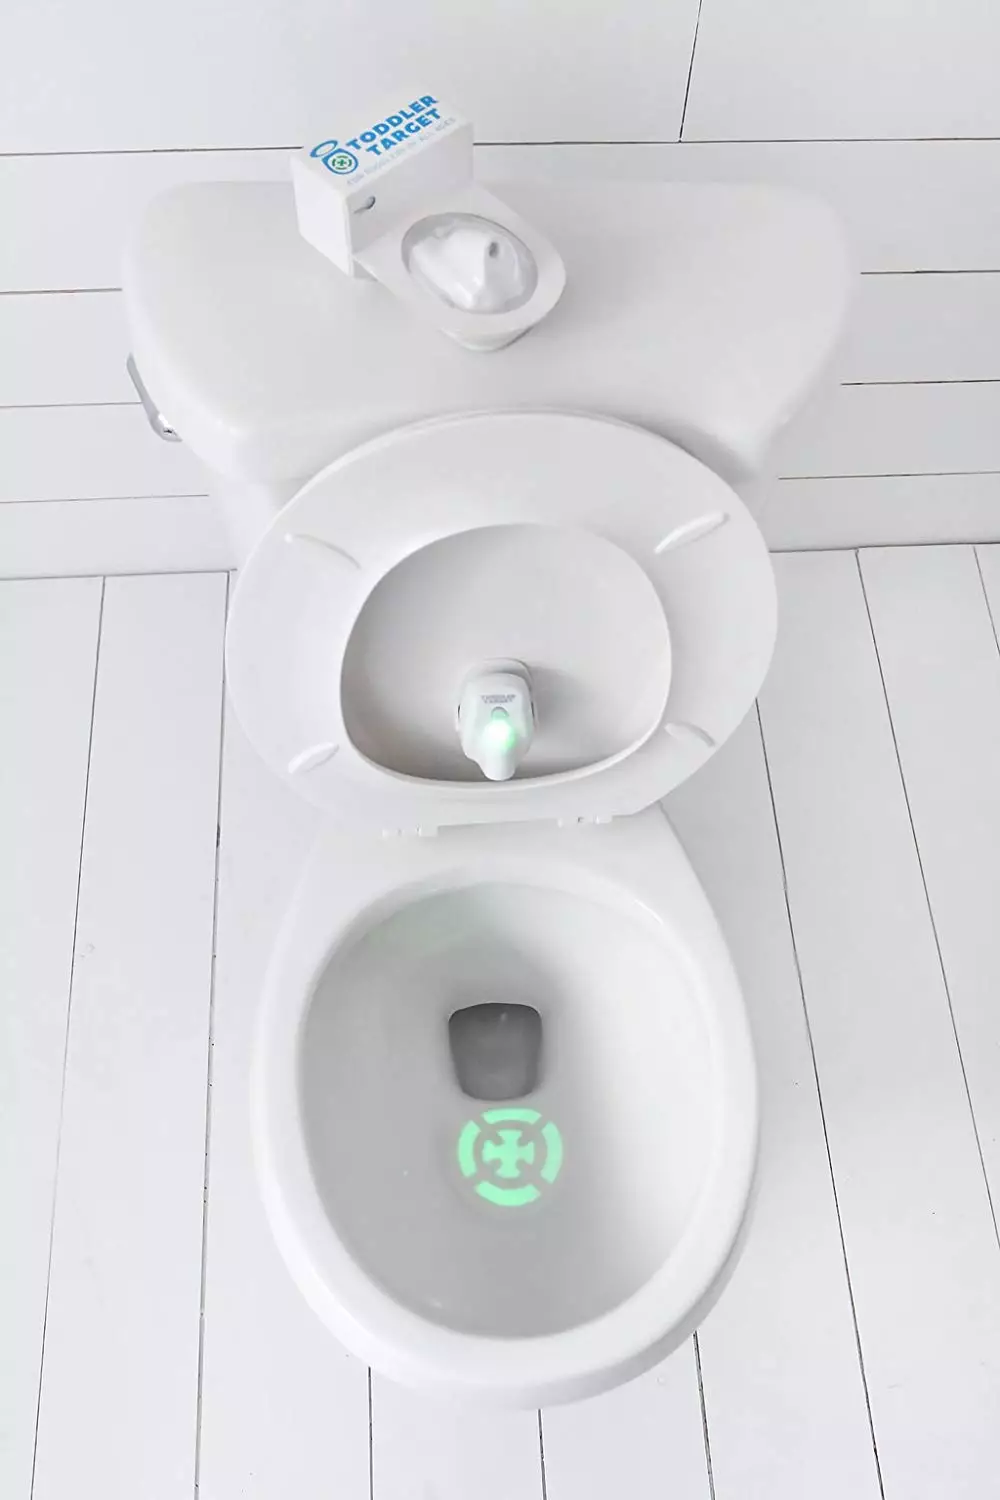 The clever gadget clips on to your toilet seat.